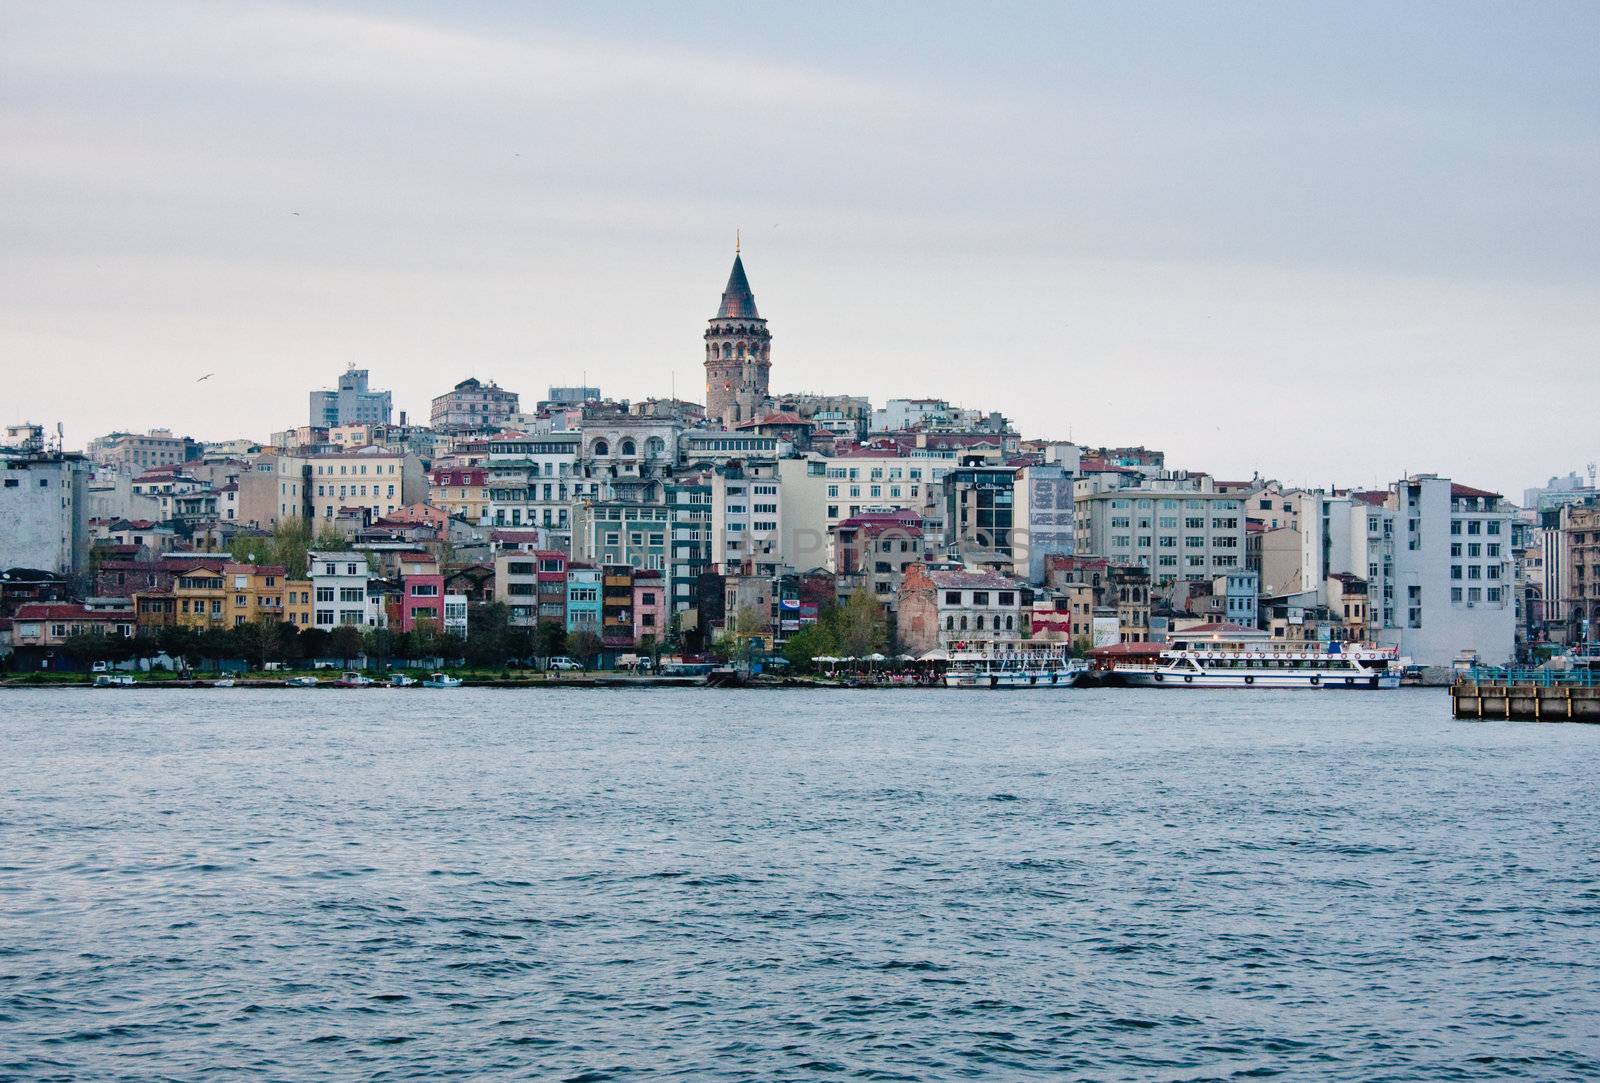 Evening shot of the Galata district in Istanbul